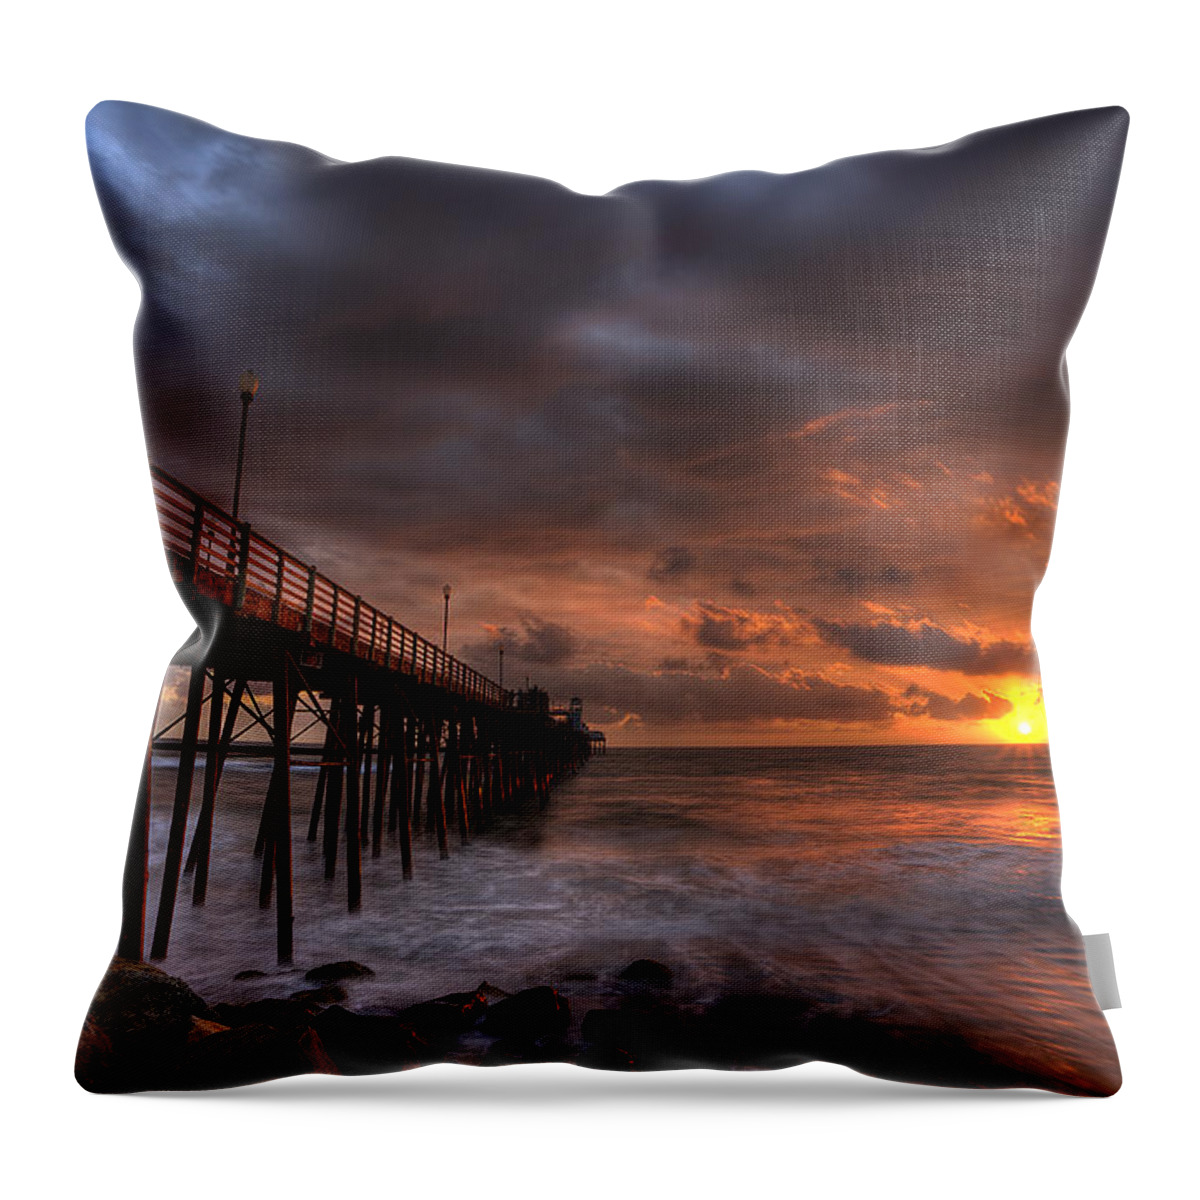 Sunset Throw Pillow featuring the photograph Oceanside Pier Perfect Sunset by Peter Tellone